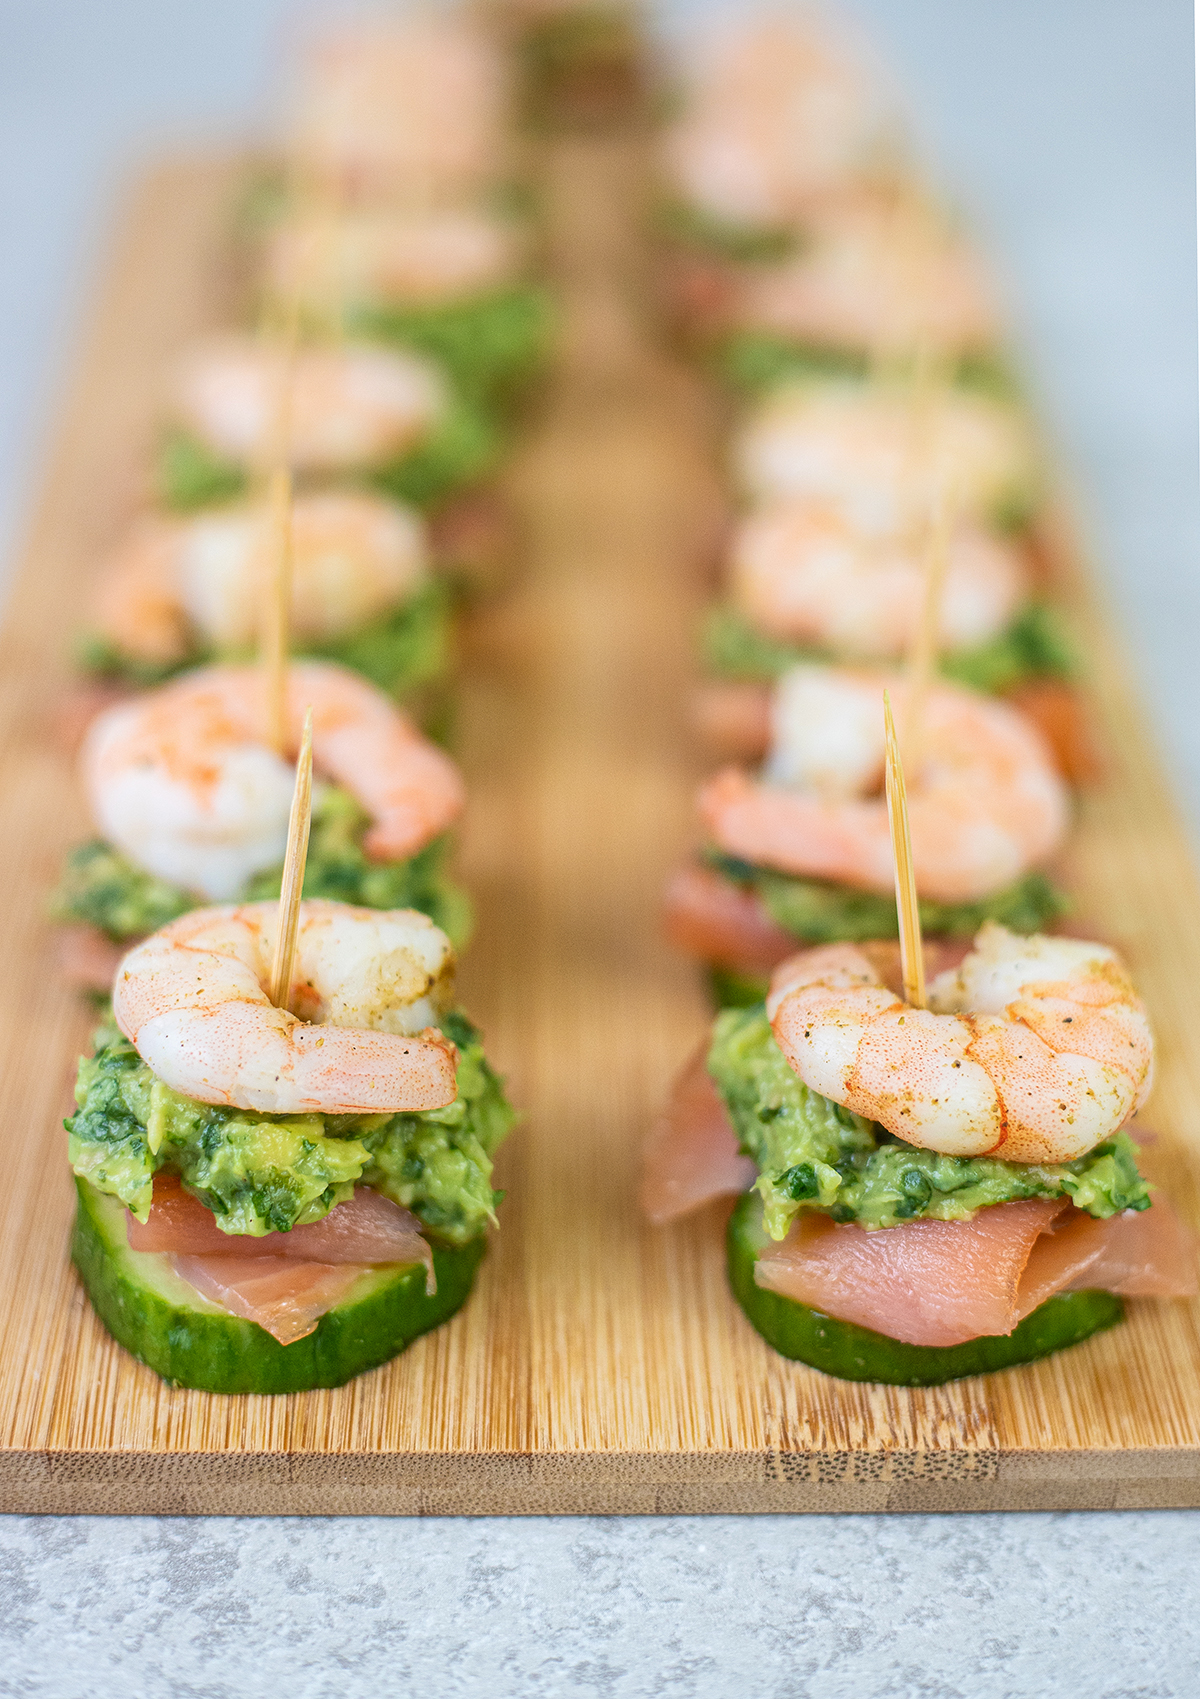 Shrimp appetizers are an easy party food.